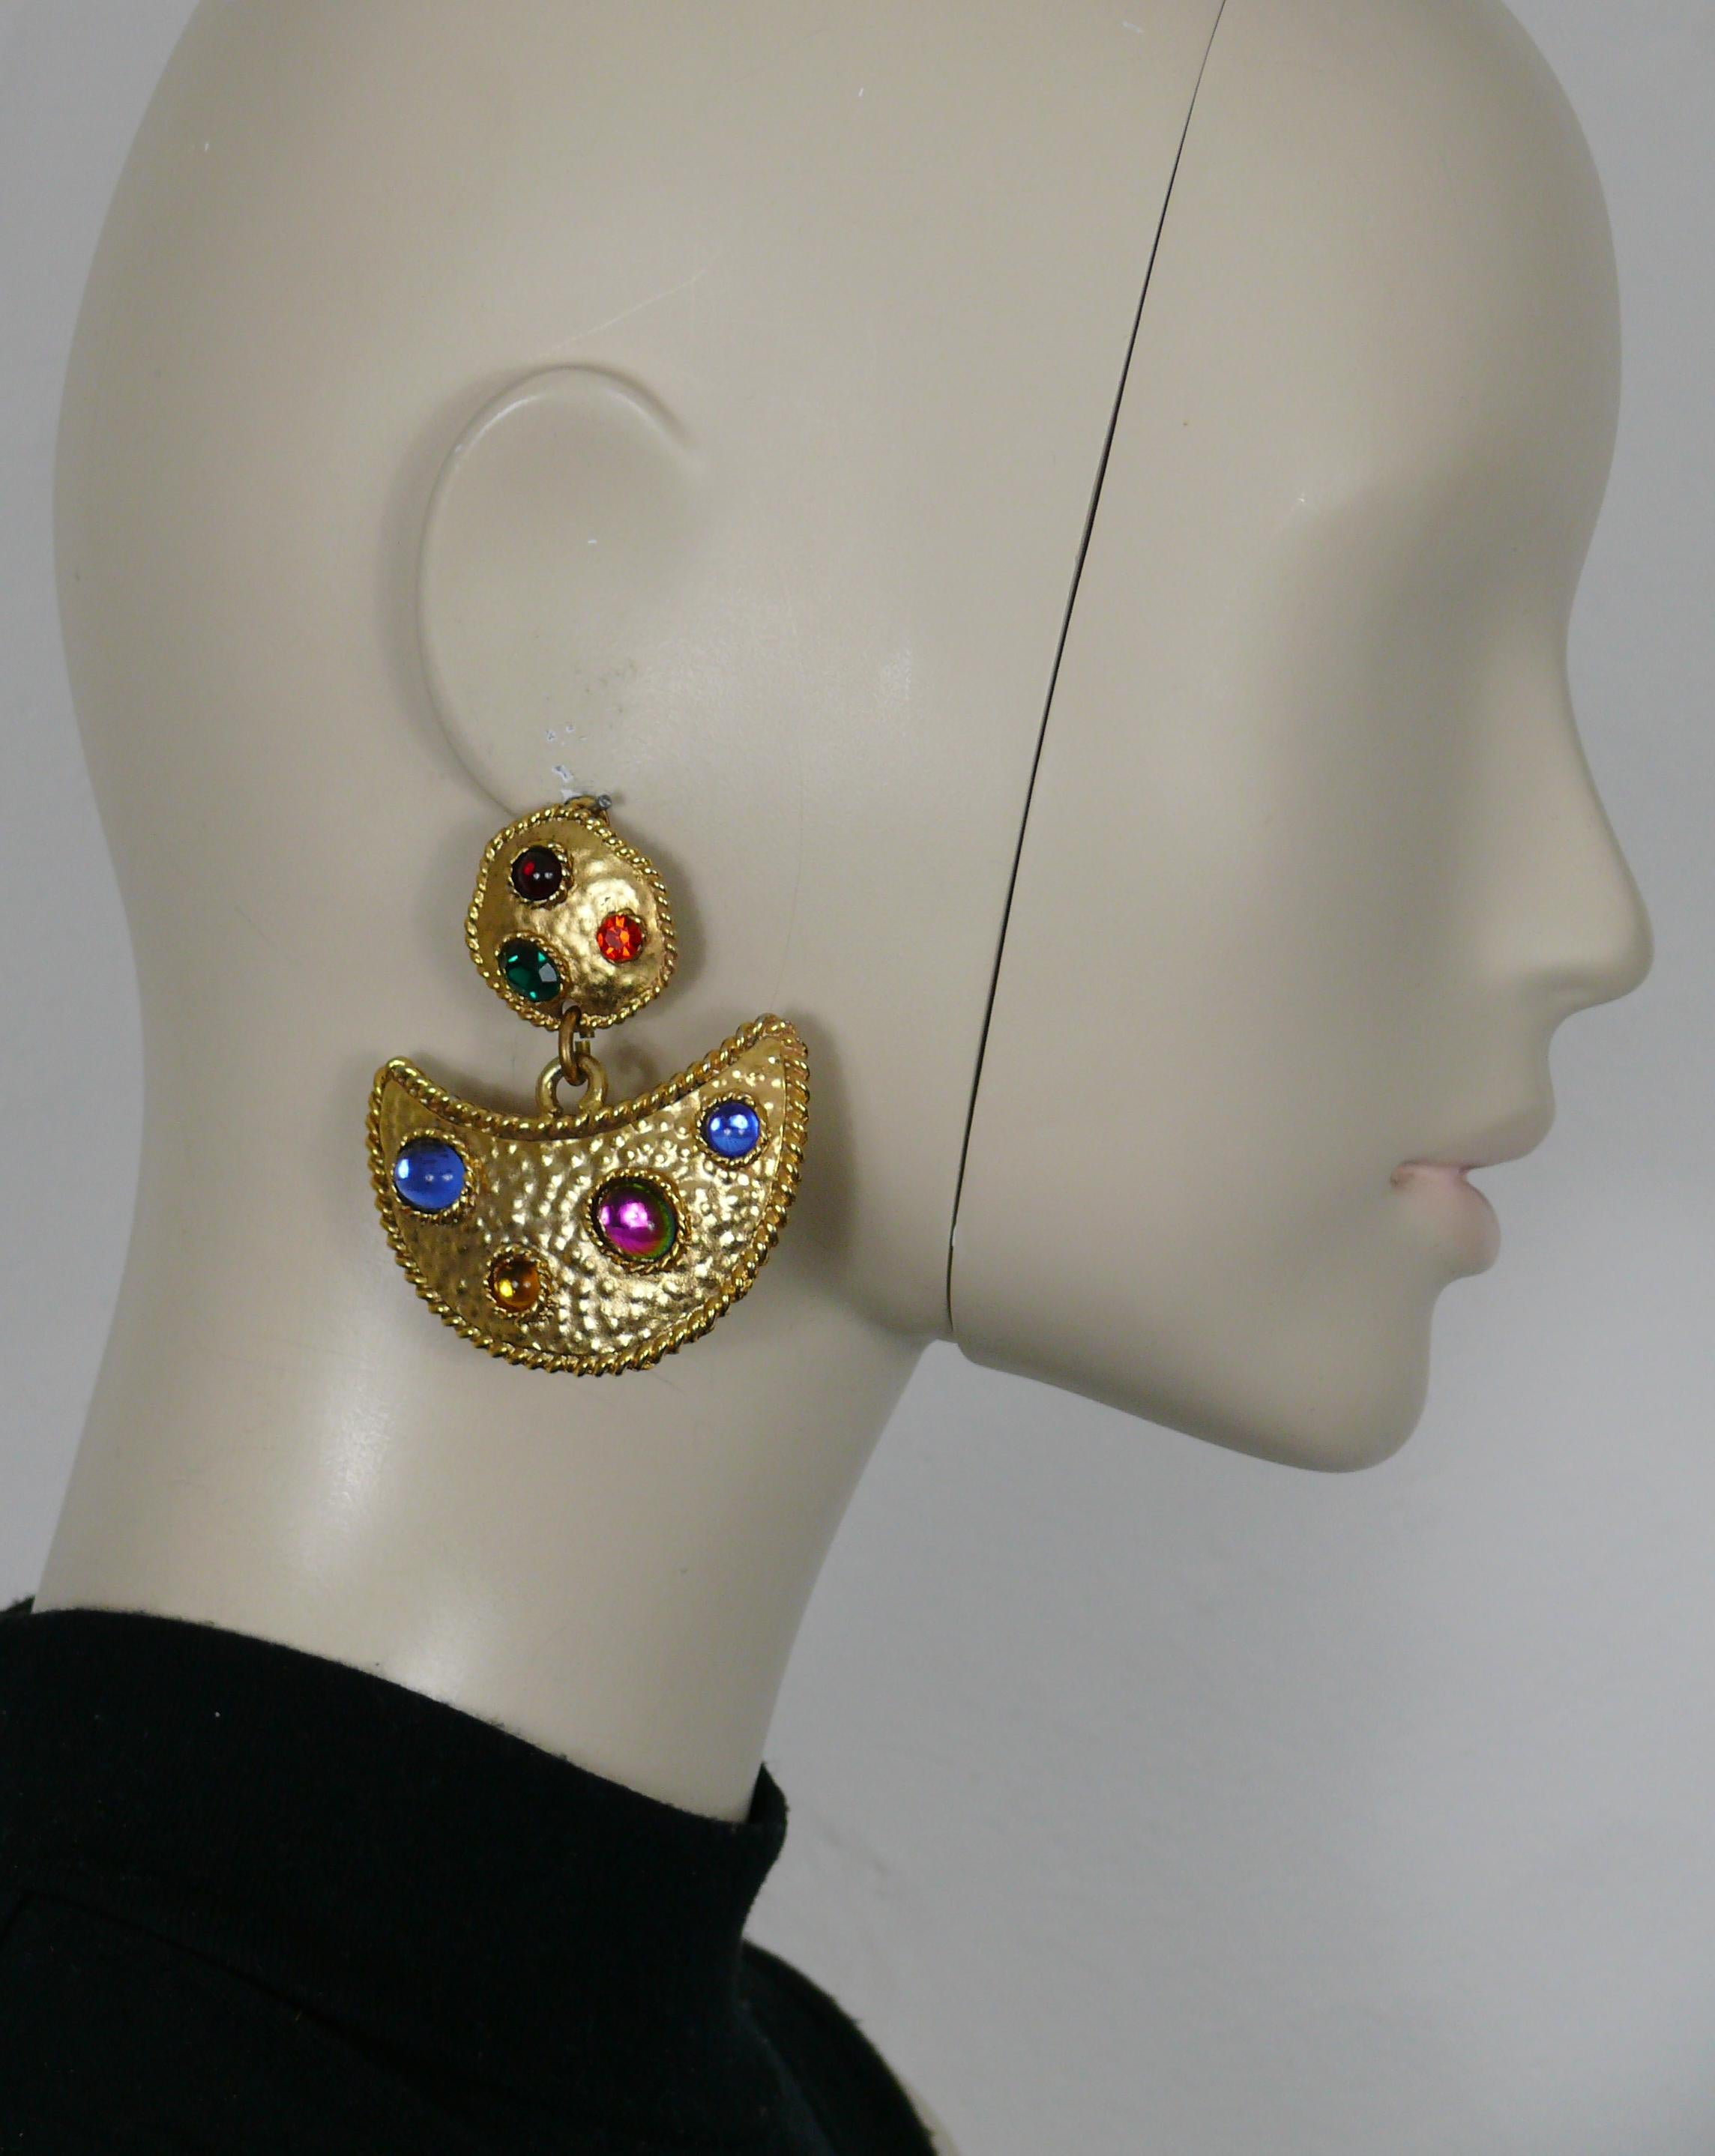 EDOUARD RAMBAUD vintage massive textured gold tone dangling earrings (clip-on) embellished with multicolor crystals and glass cabochons.

Embossed EDOUARD RAMBAUD Paris.

Indicative measurements : max. height approx. 6.5 cm (2.56 inches) / max width